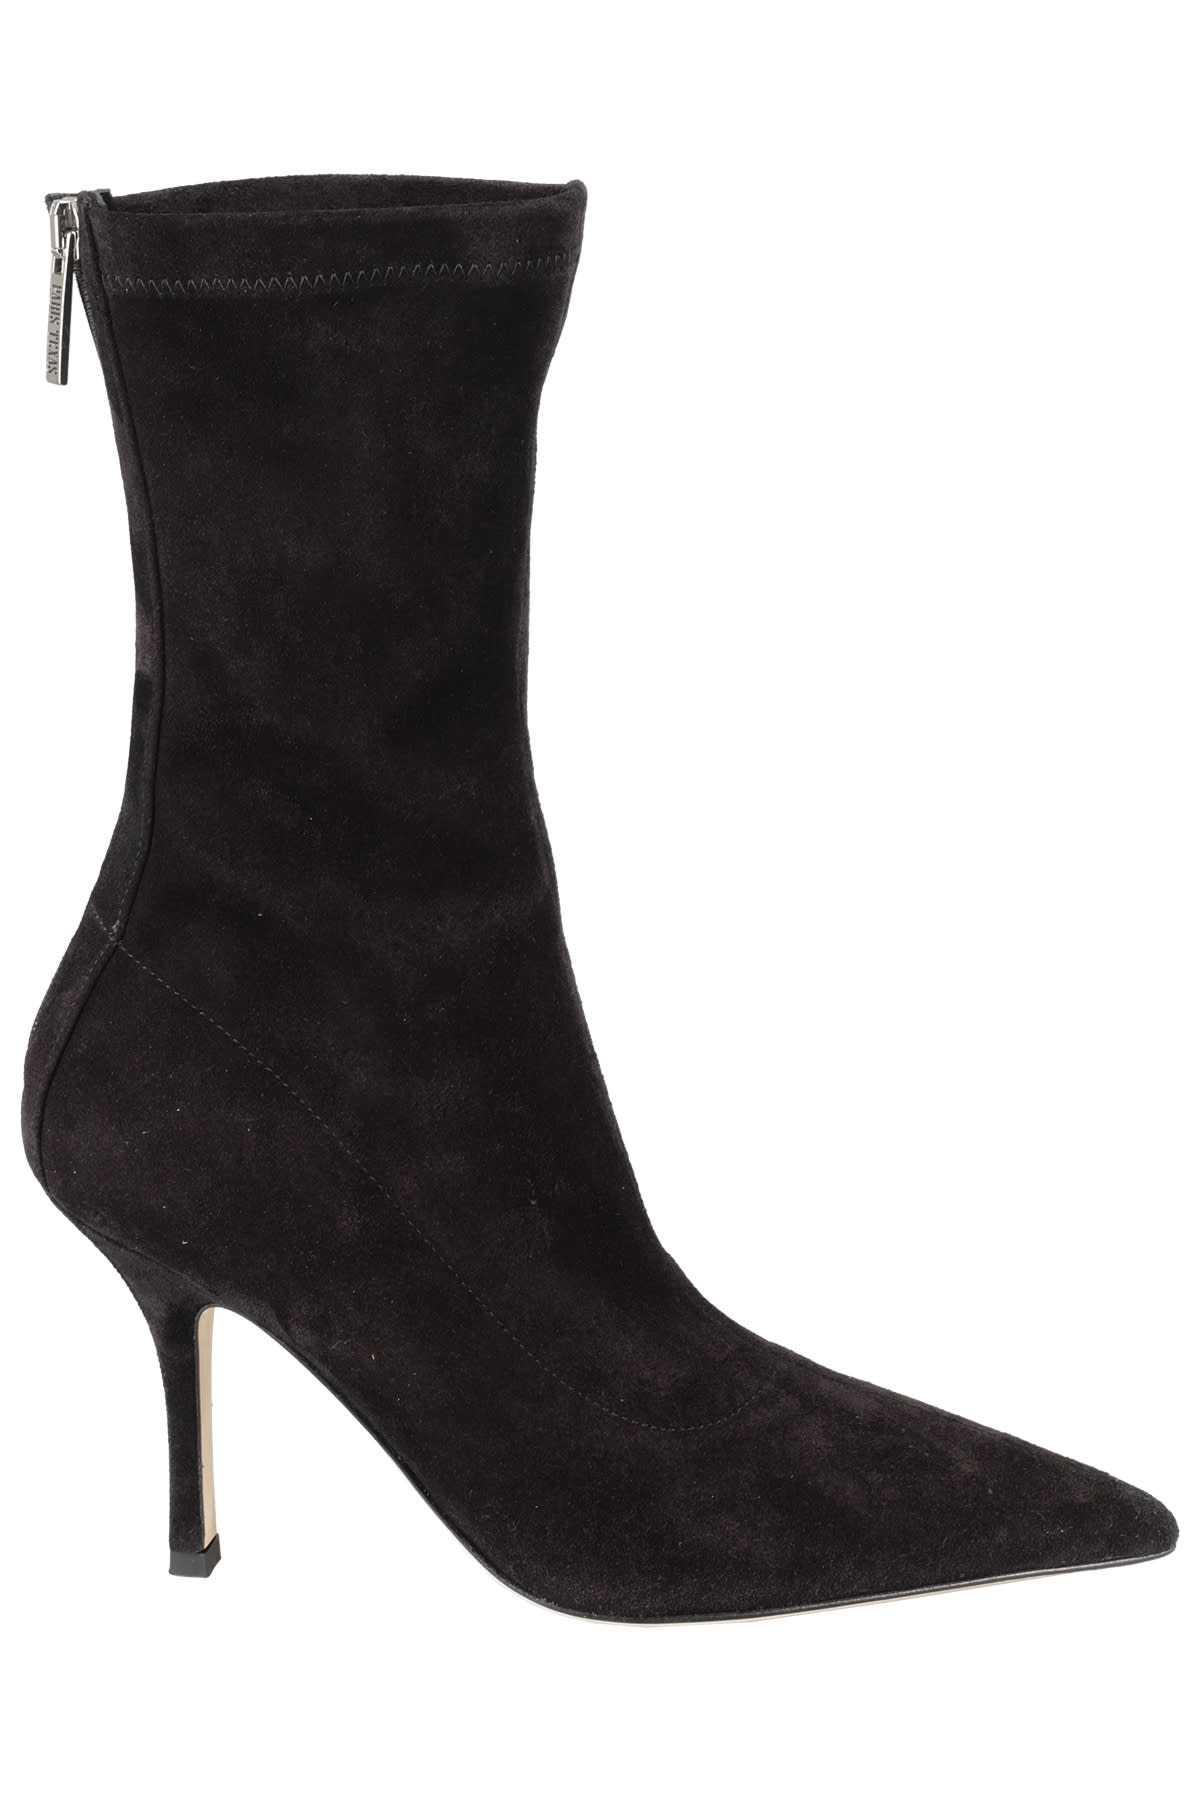 Paris Texas Mama Ankle Boot Stretch